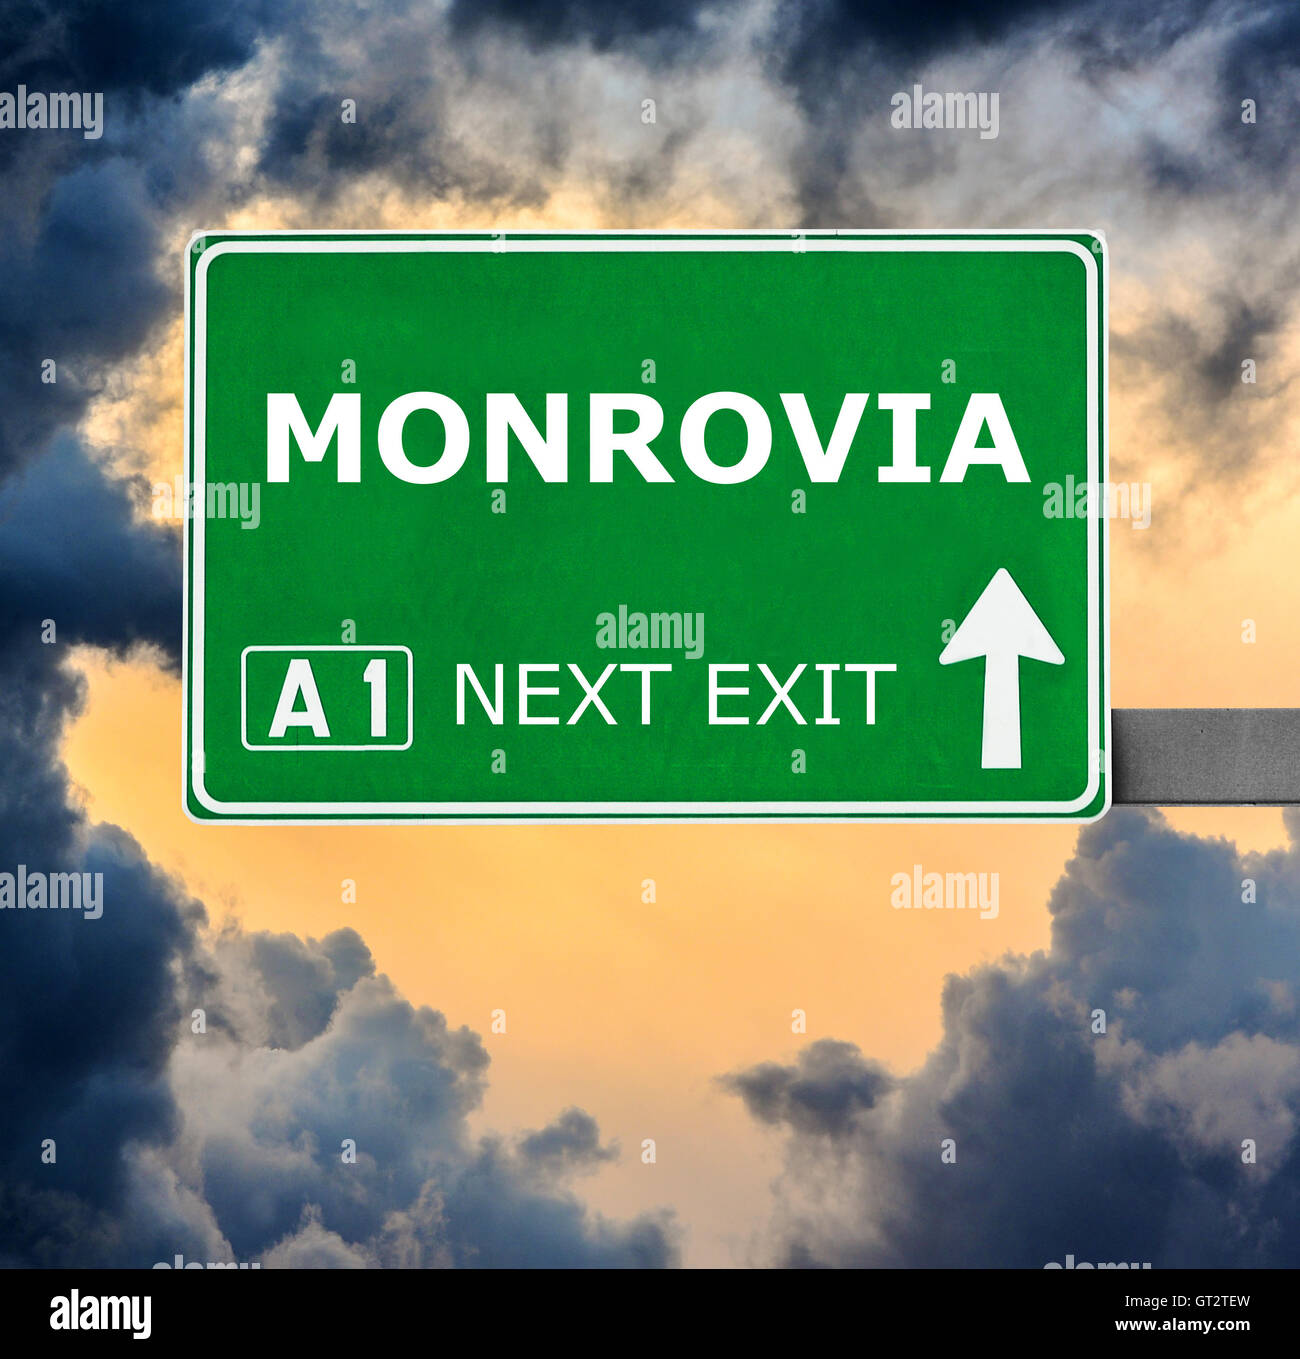 MONROVIA road sign against clear blue sky Stock Photo